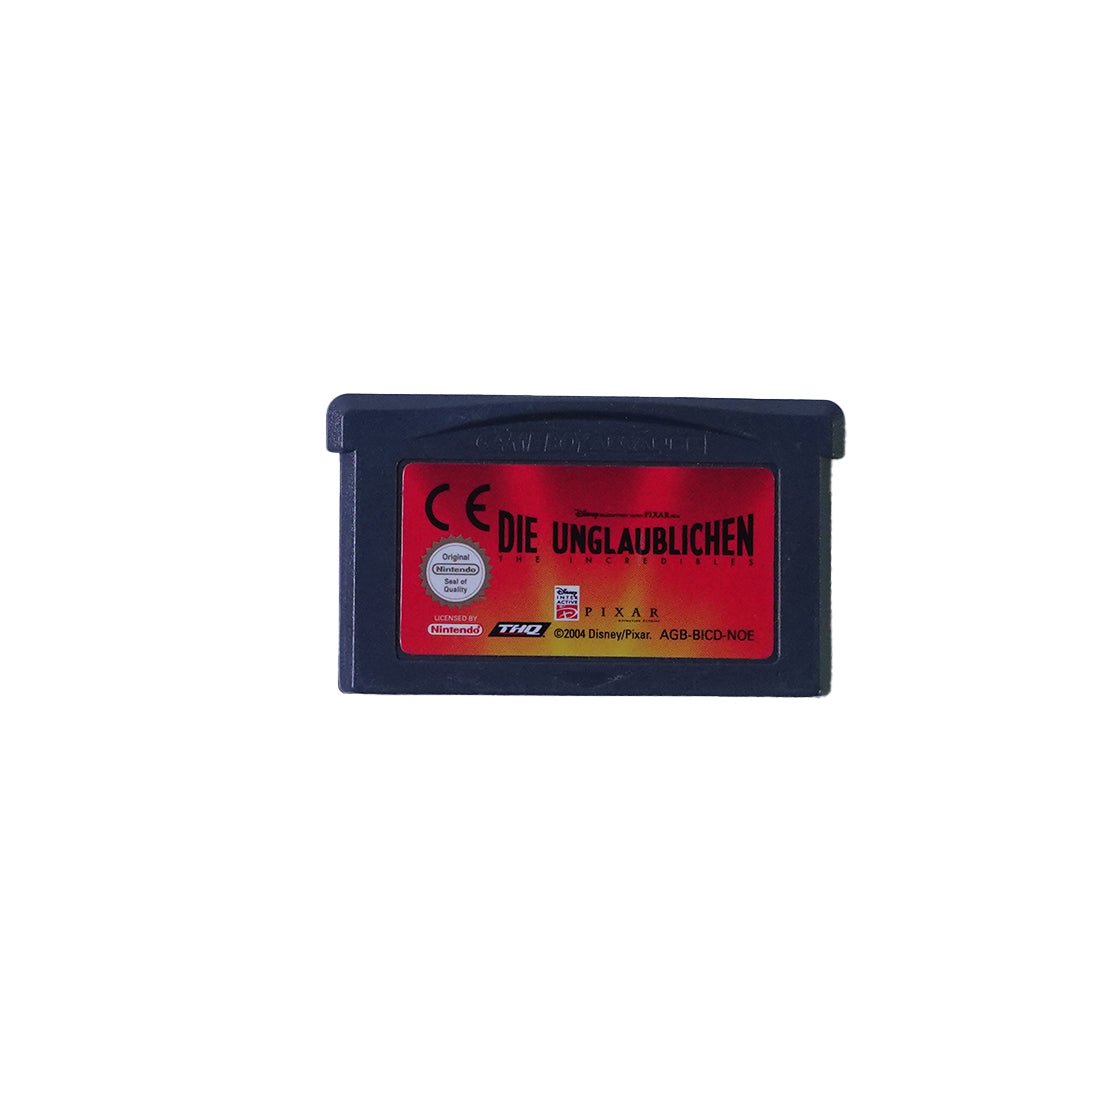 (Pre-Owned) The Incredibles (Die Unglaublichen) Game - Gameboy Advance - ريترو - Store 974 | ستور ٩٧٤